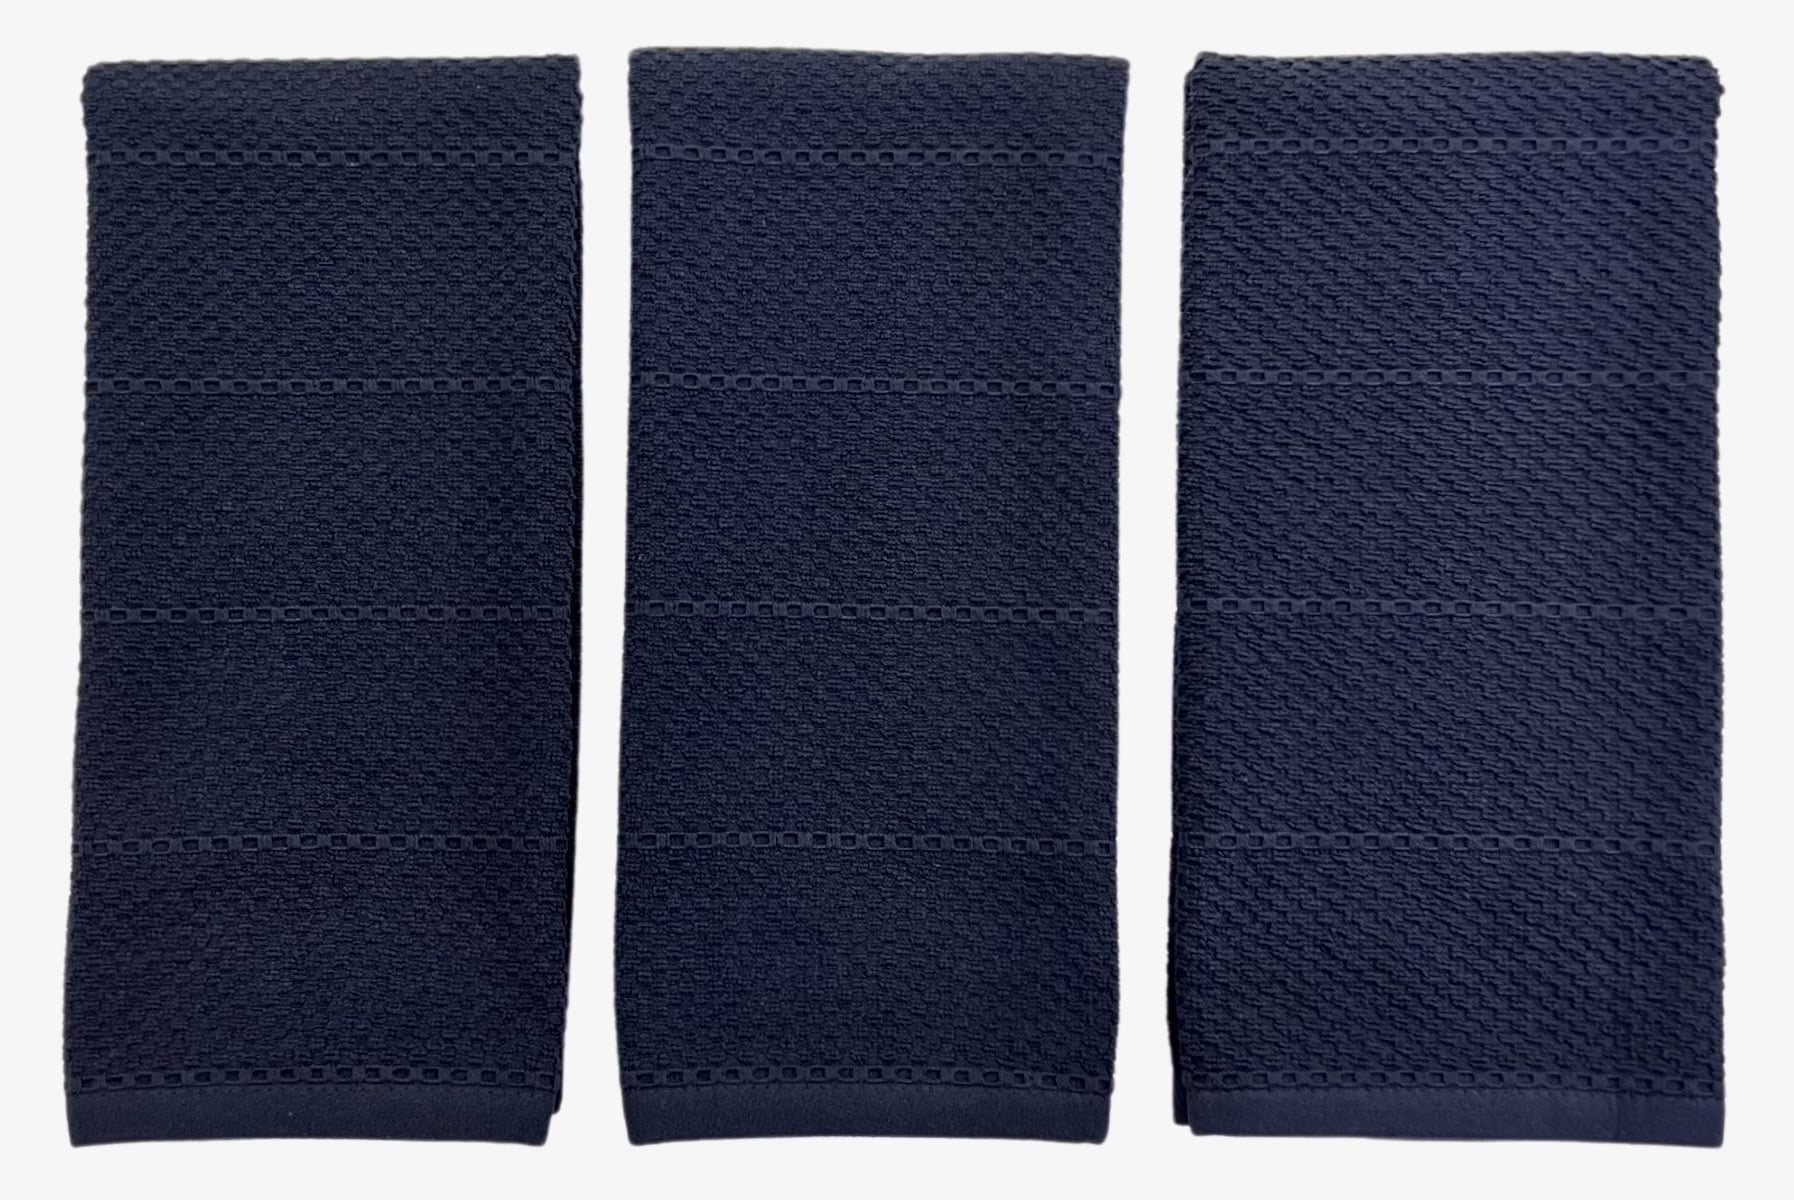 Serafina Home Teal Blue Kitchen Towels: 100% Cotton Soft Absorbent Terry  Cloth, Set of 3